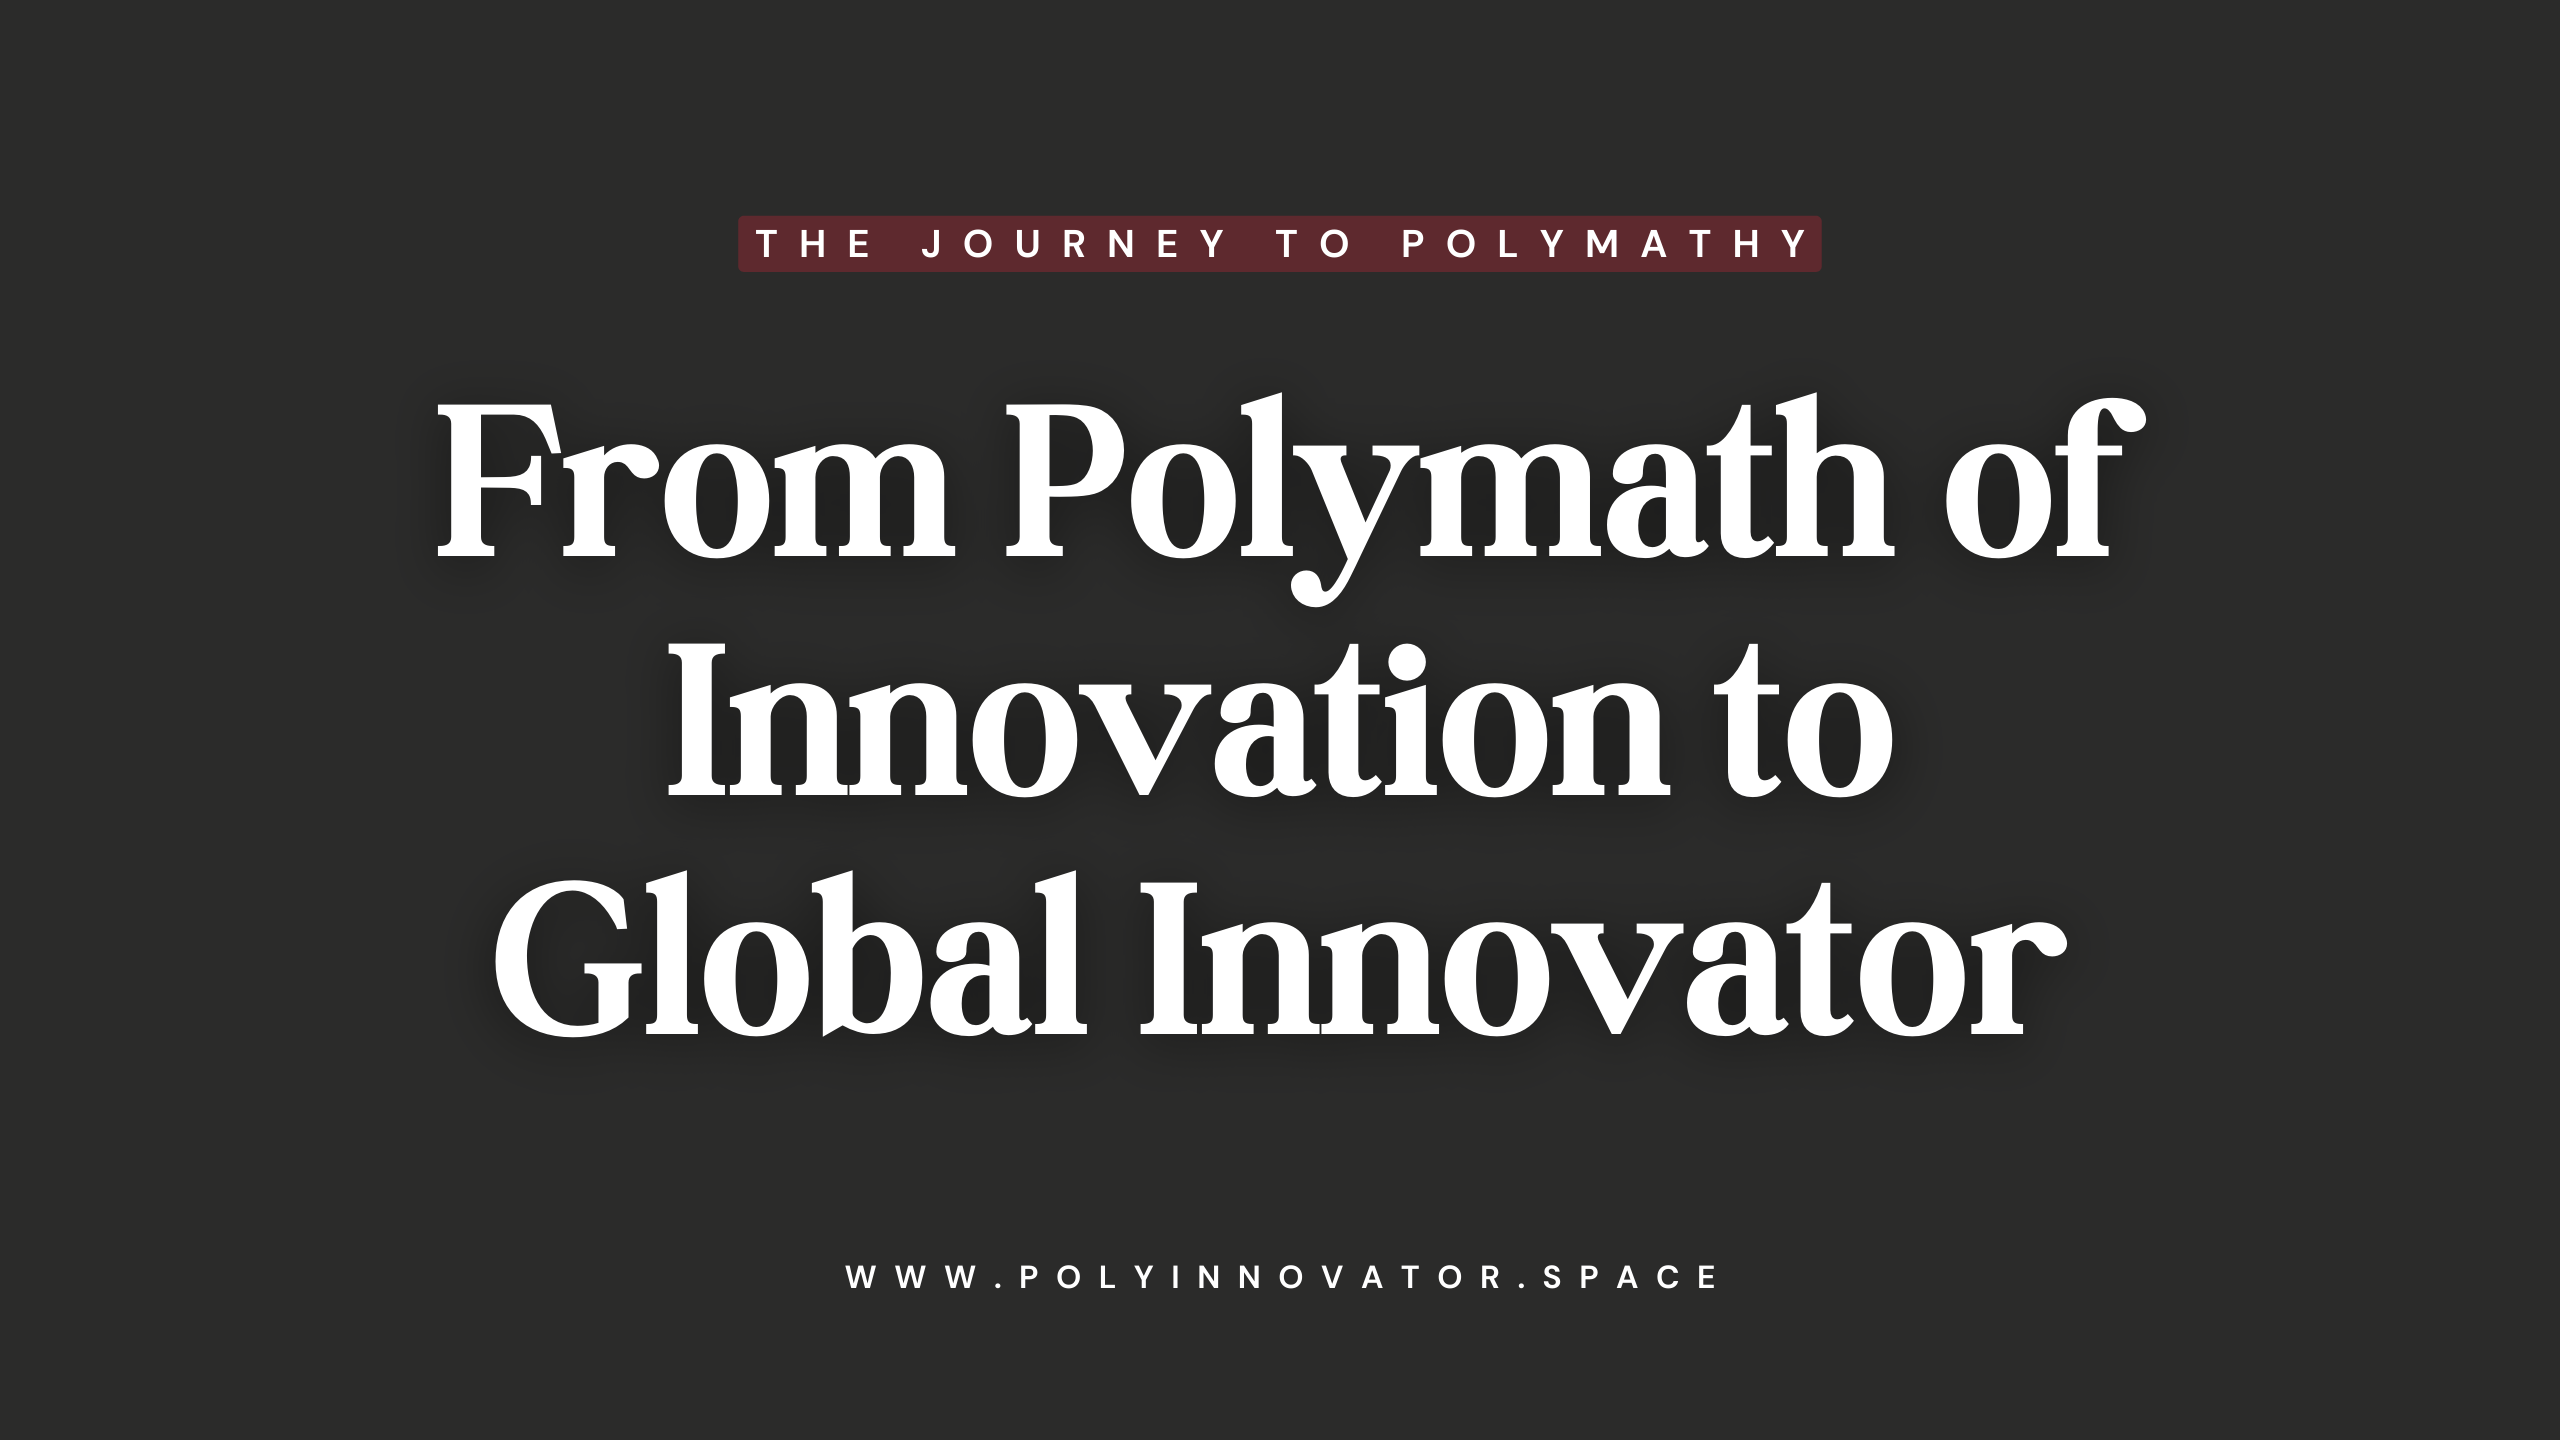 From Polymath of Innovation to Global Innovator